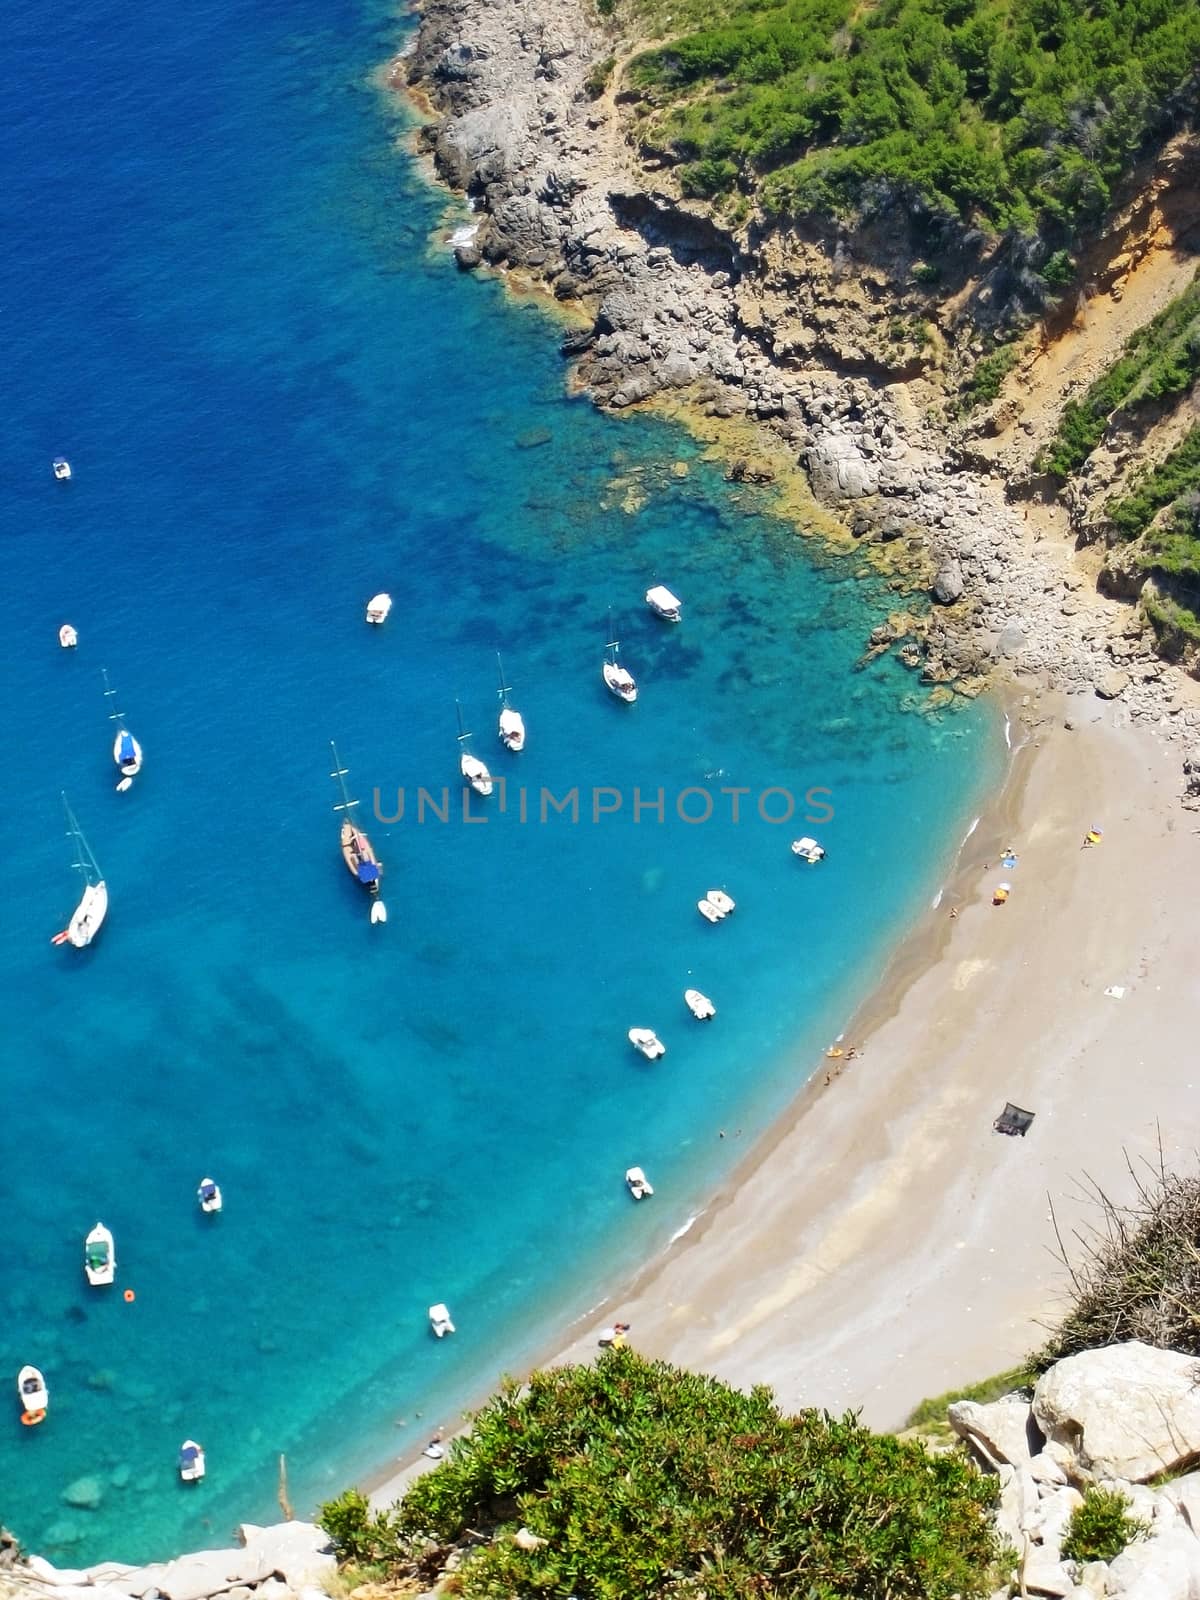 Coll Baix beach / playa, Majorca, Spain - bay with clear turquoise water - detail view from above during hiking tour